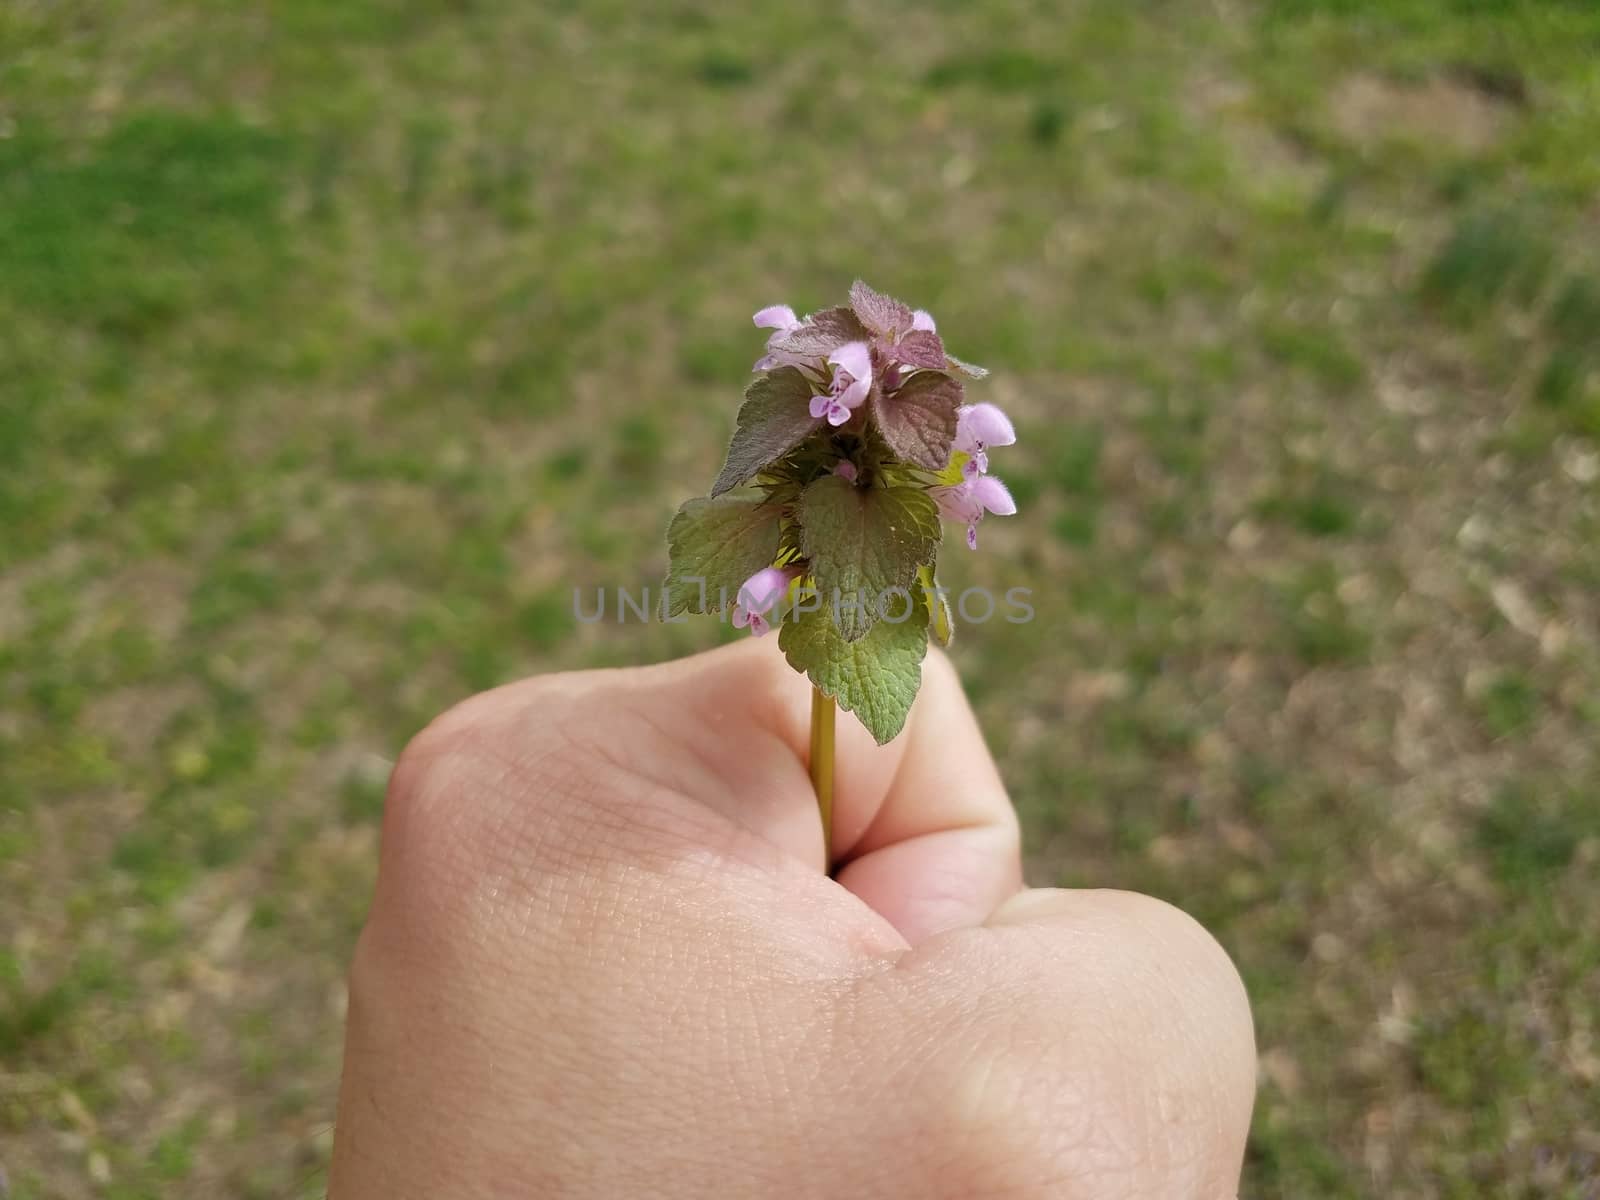 hand or fist holding weed with green leaves and purple flower petals